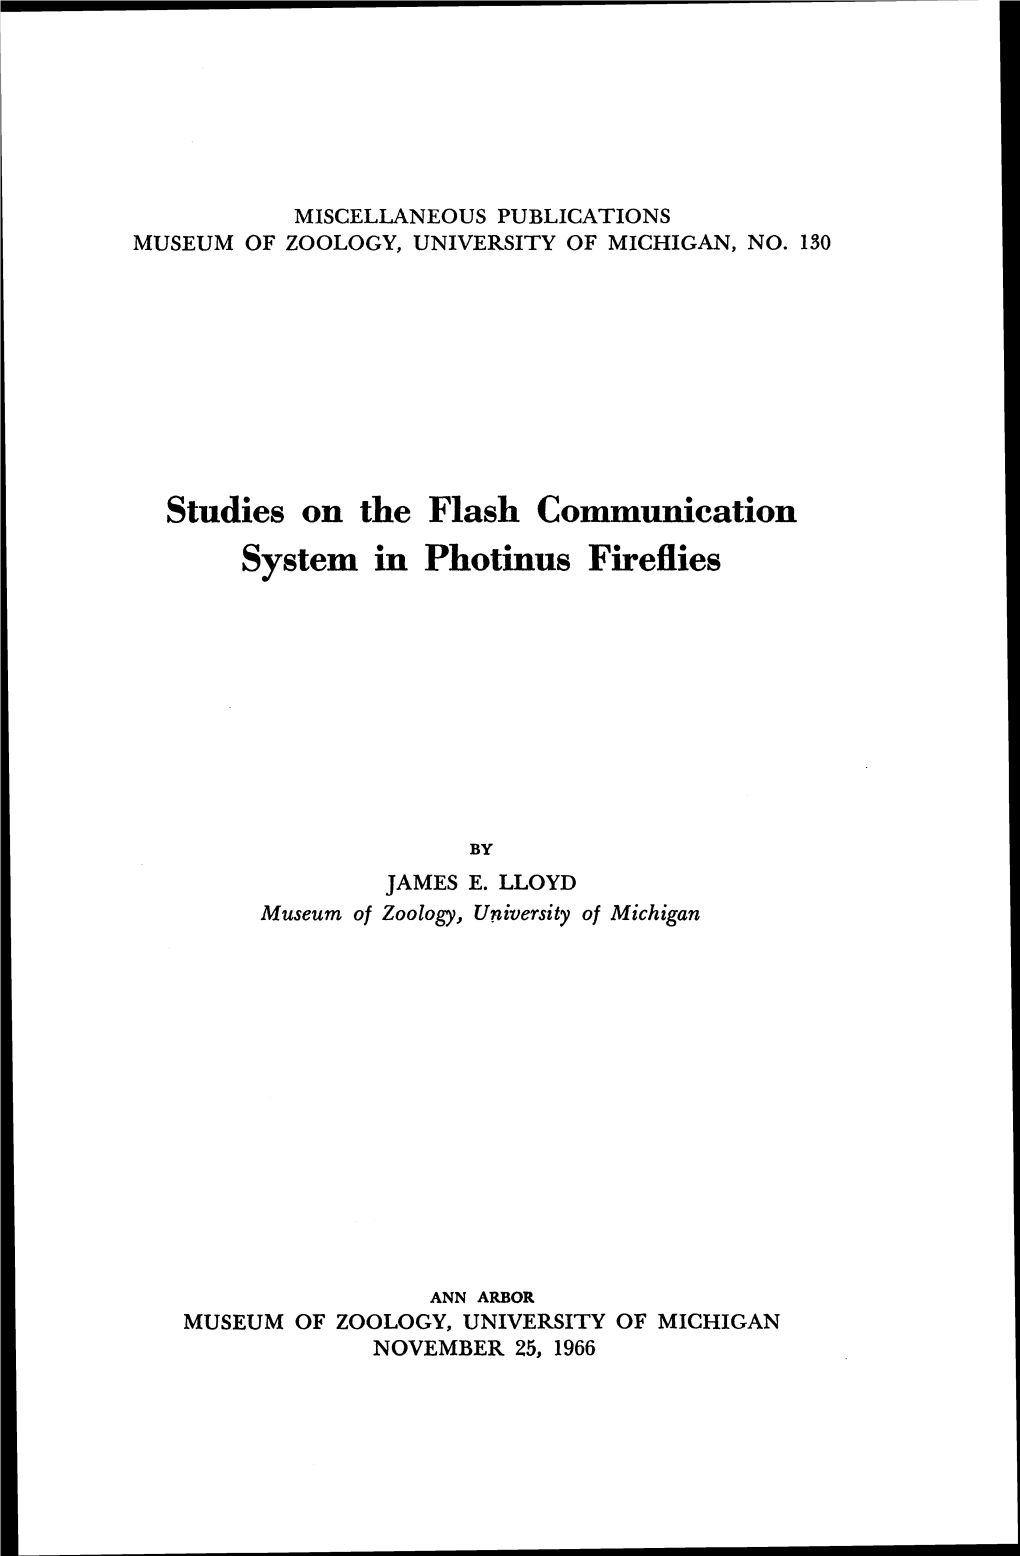 Studies on the Flash Communication System in Photinus Fireflies